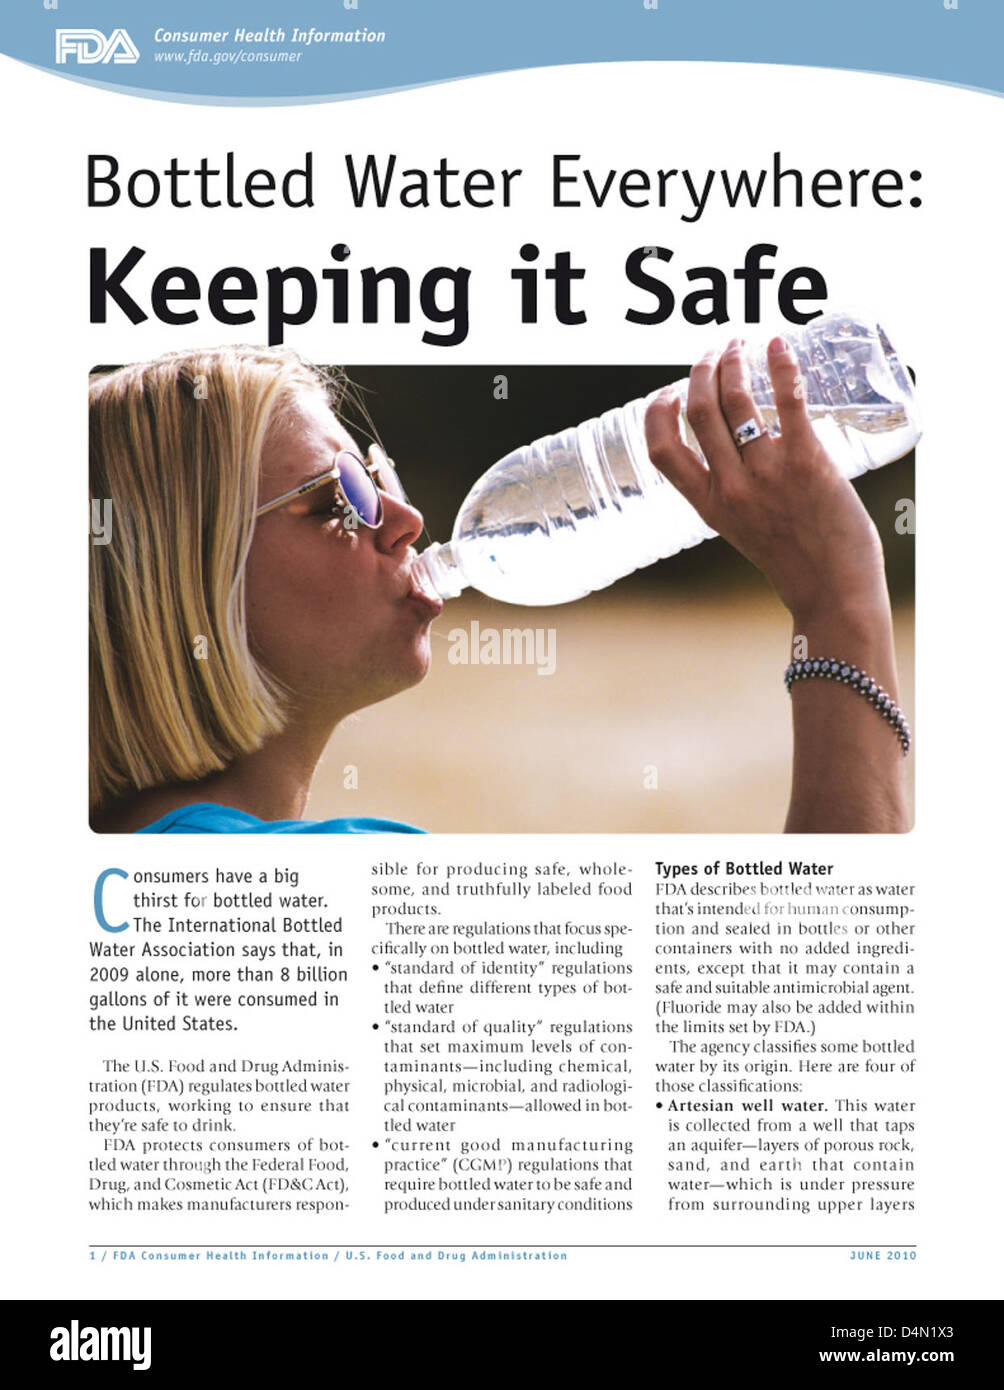 Bottled Water Everywhere: Keeping it Safe